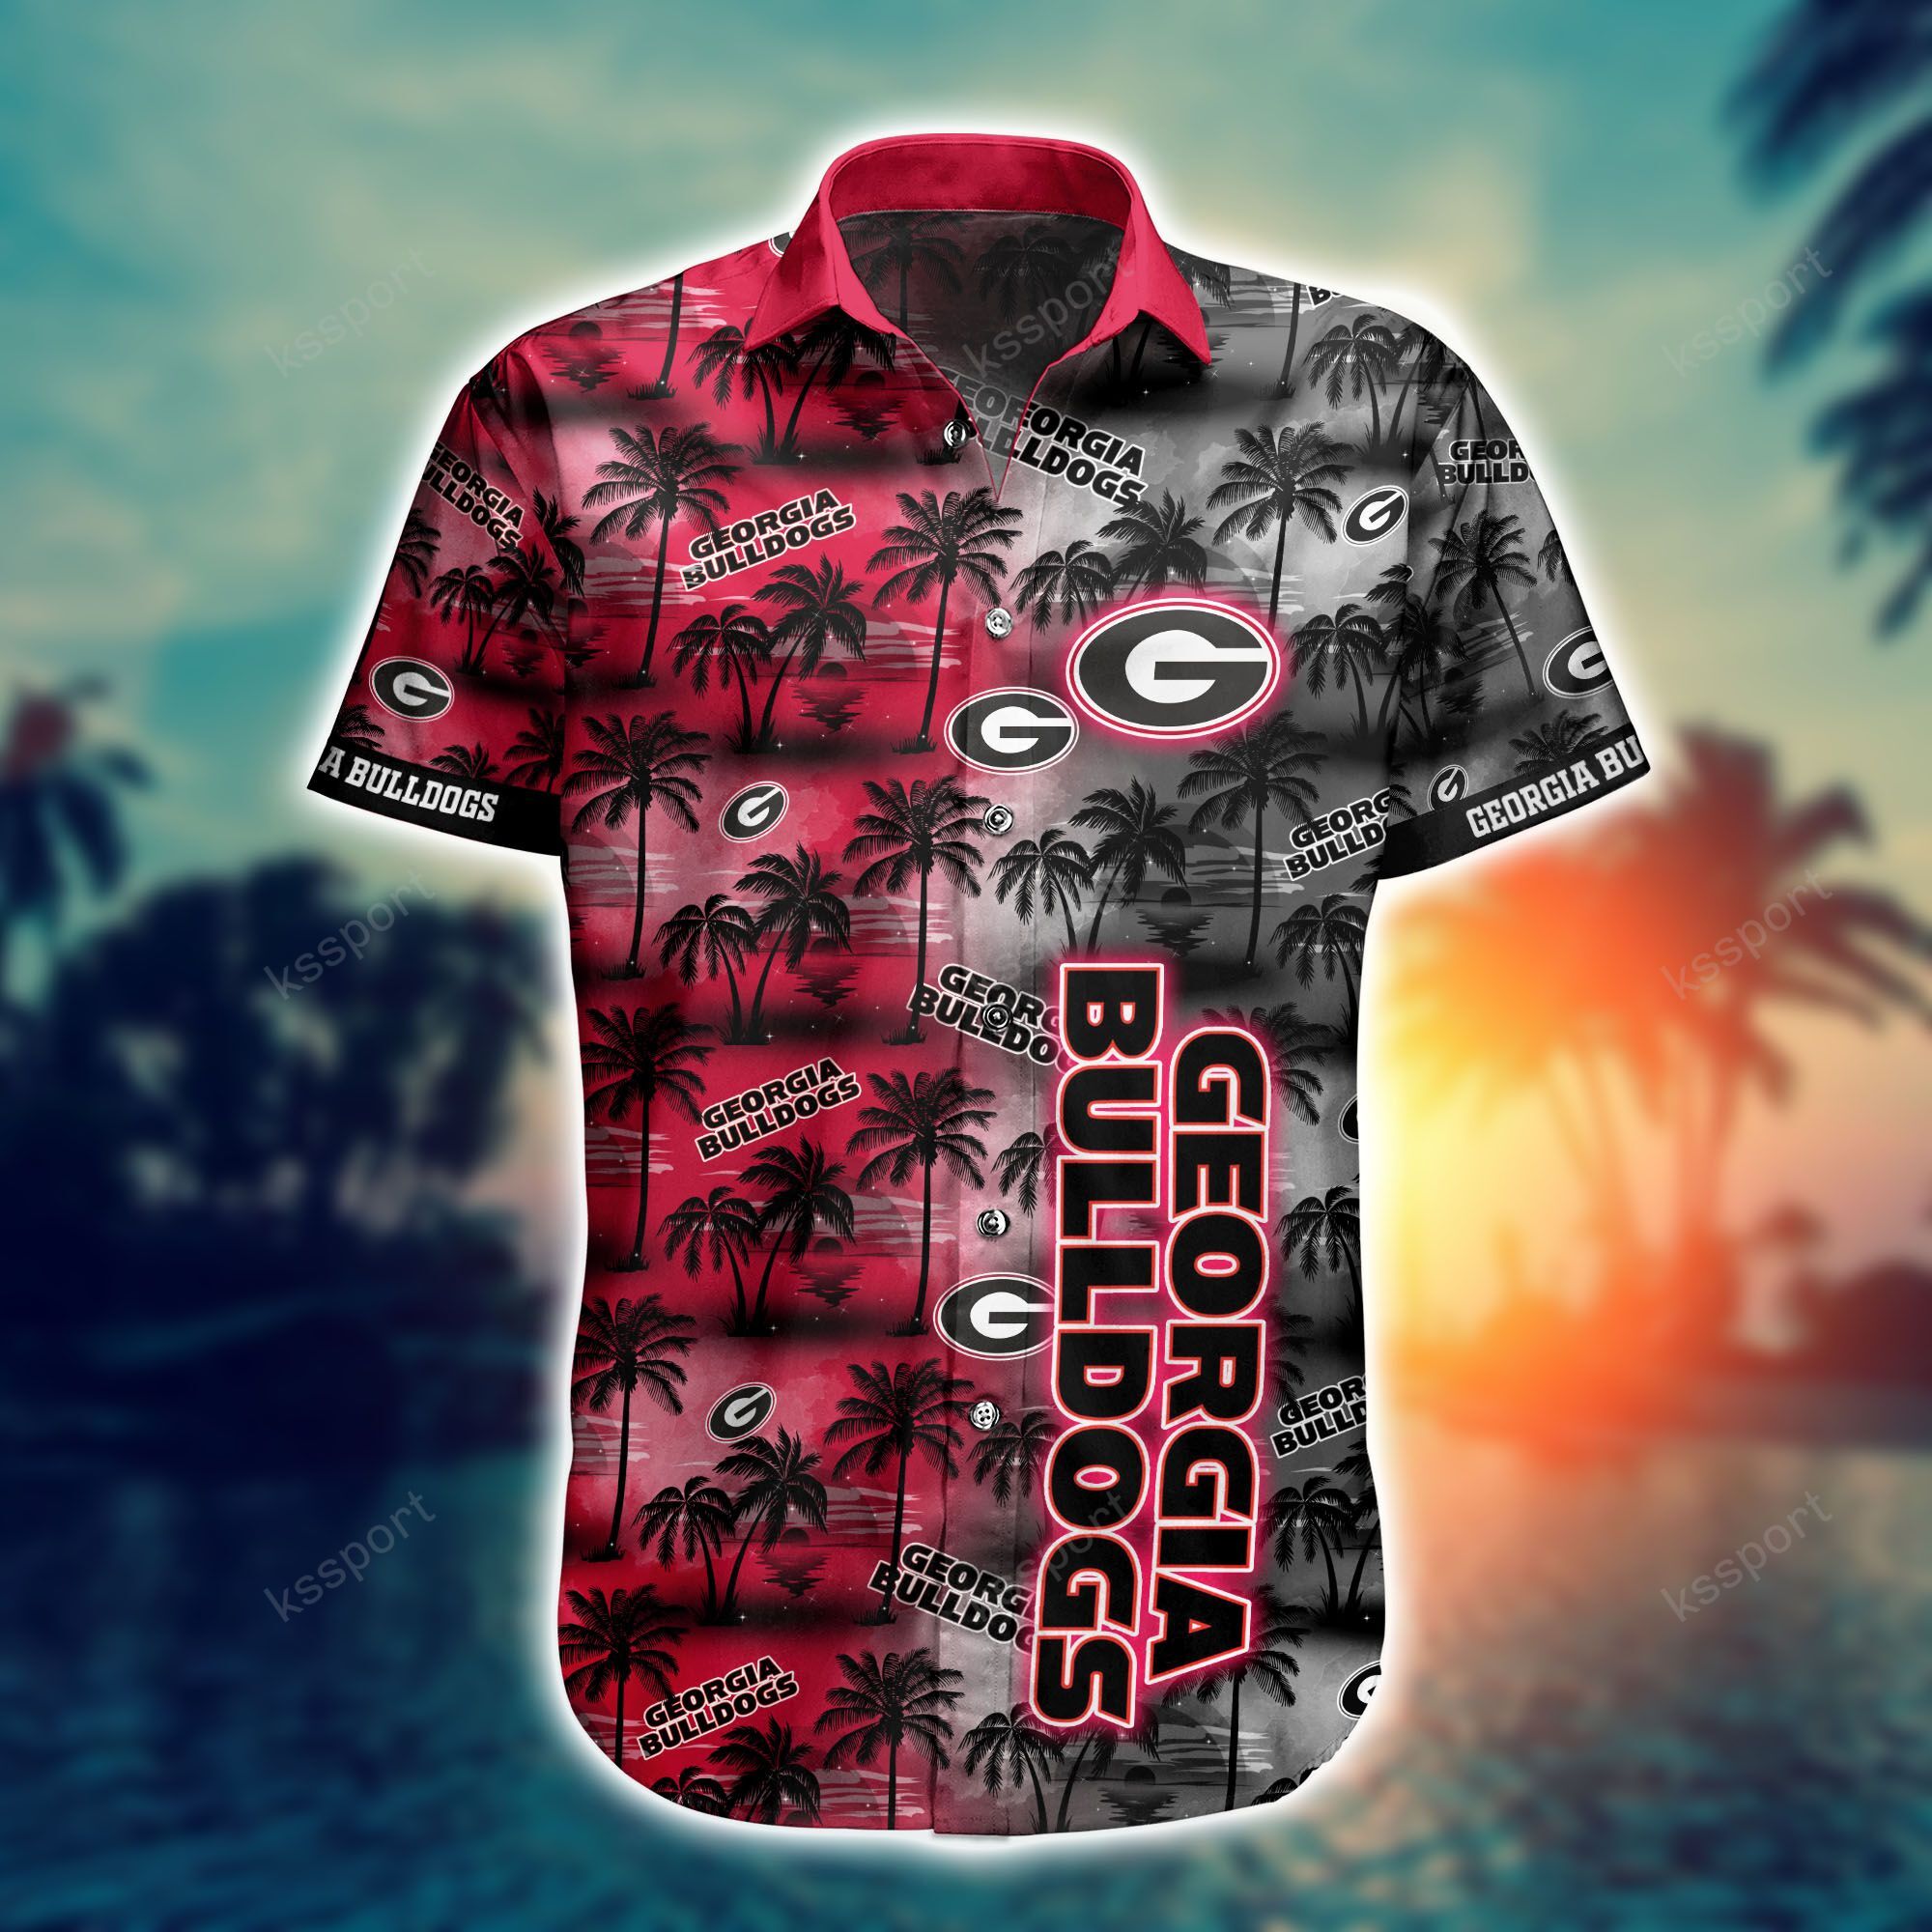 Top cool Hawaiian shirt 2022 - Make sure you get yours today before they run out! 135